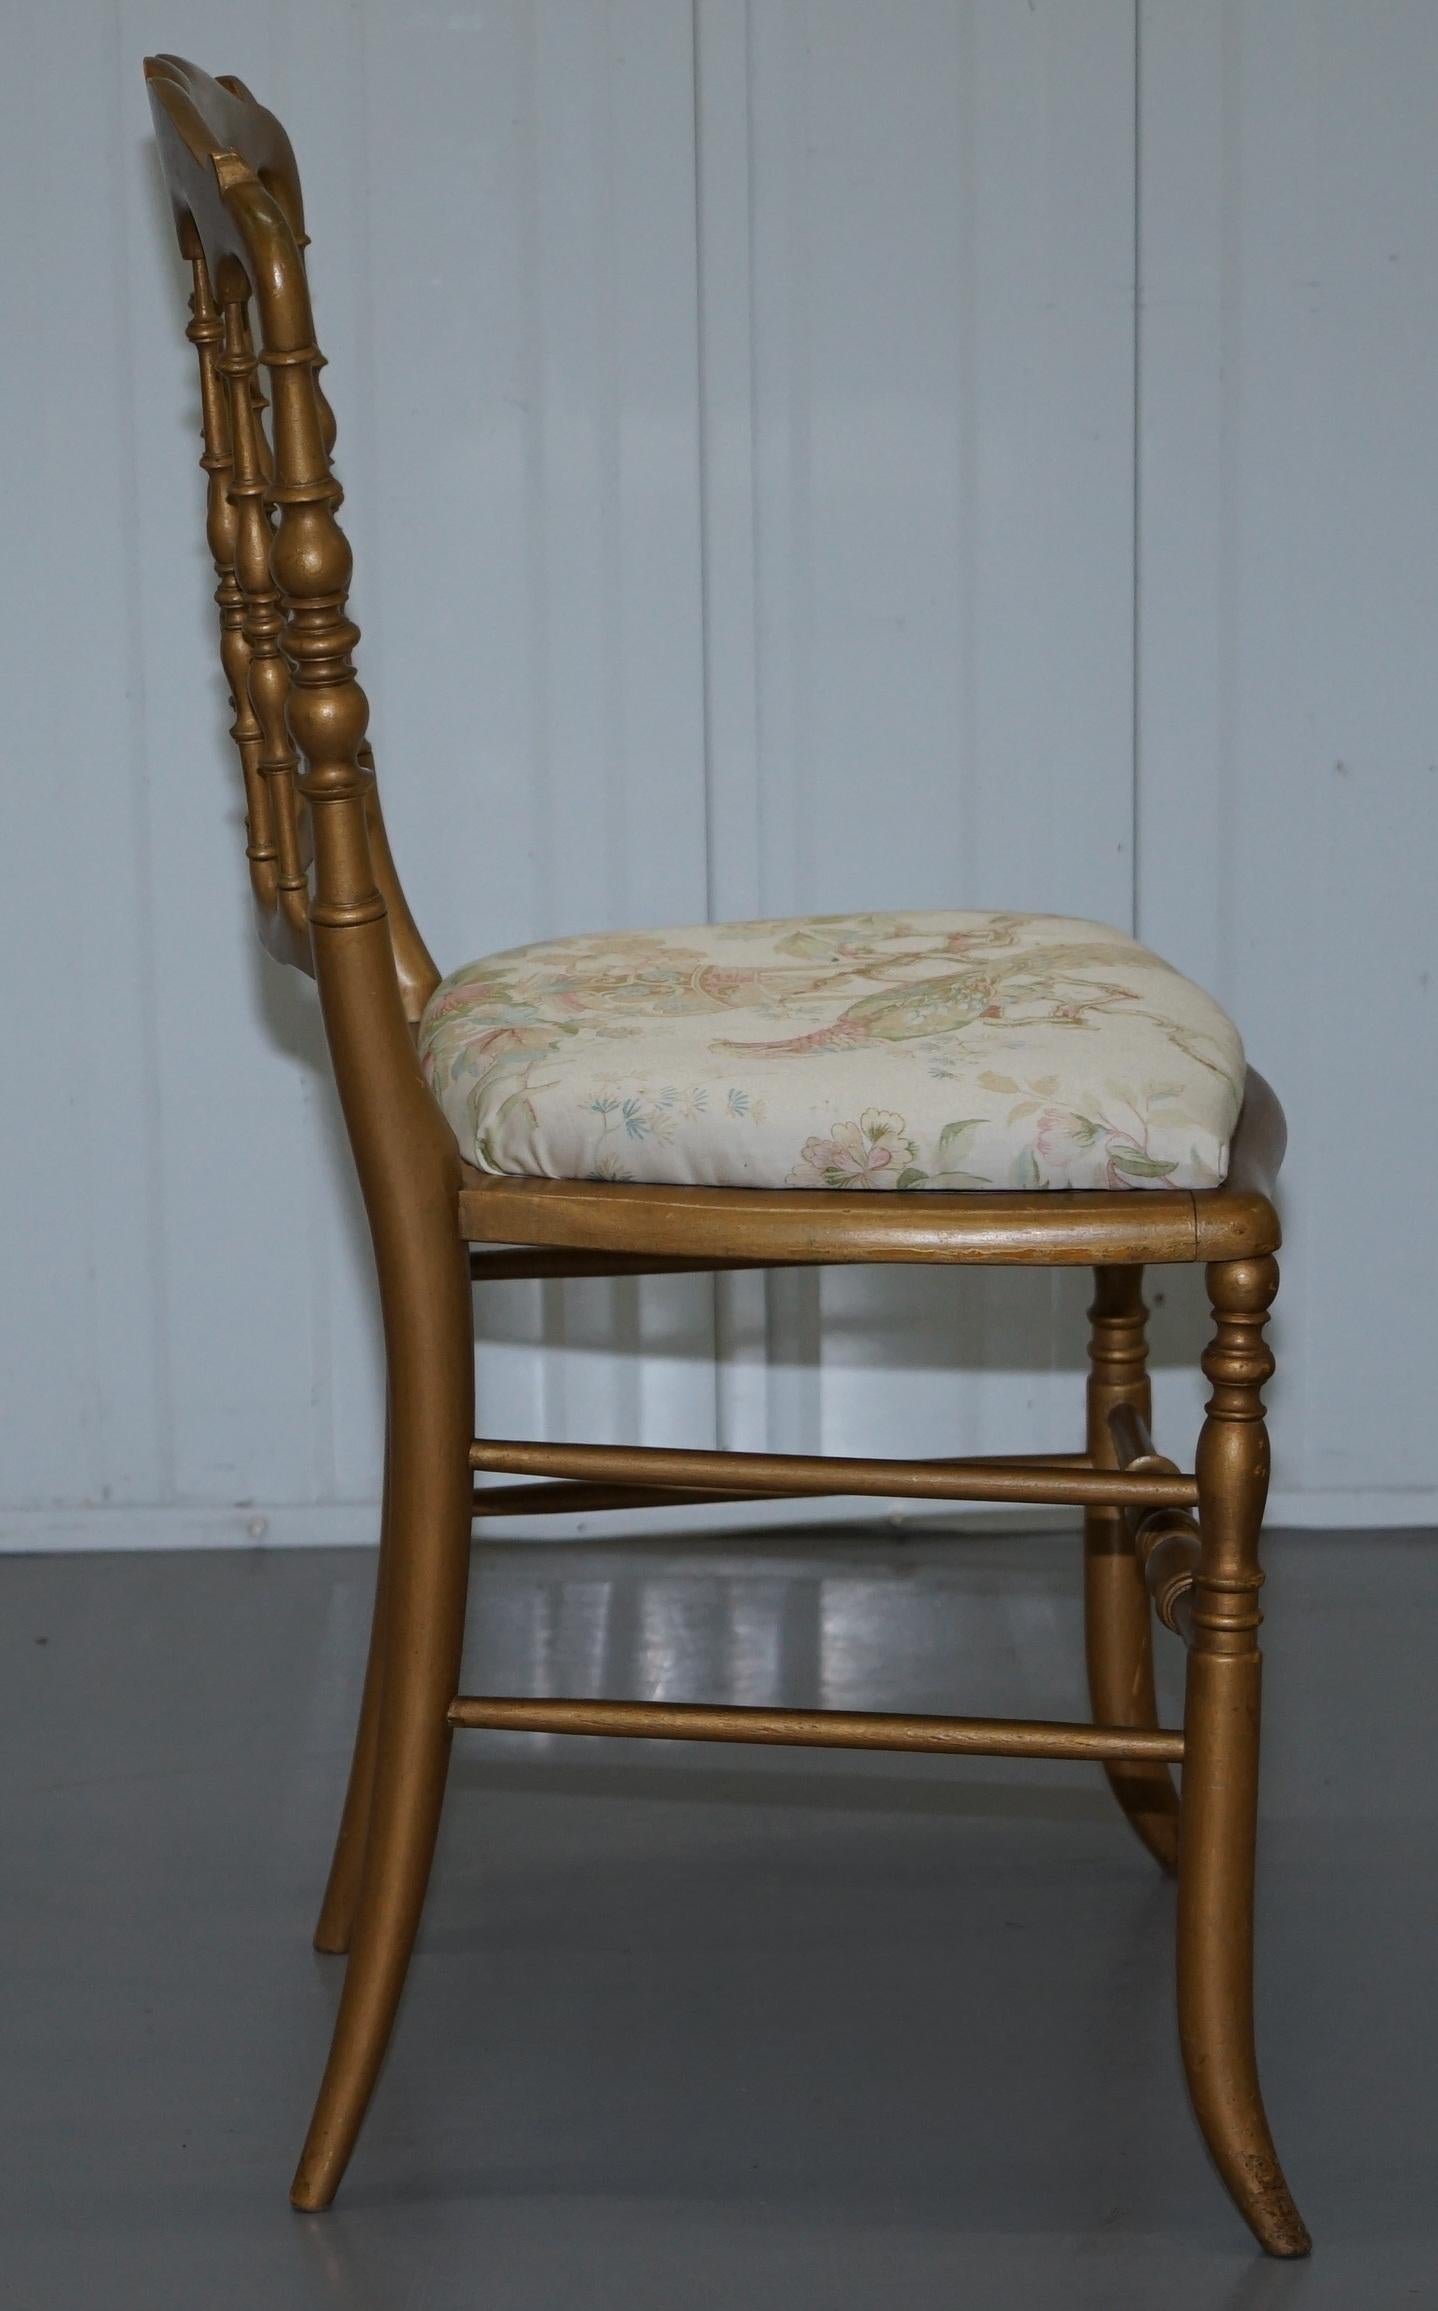 Regency Style Gold Giltwood Spindle Chair circa 1900 Ornate Bird Upholstery For Sale 3